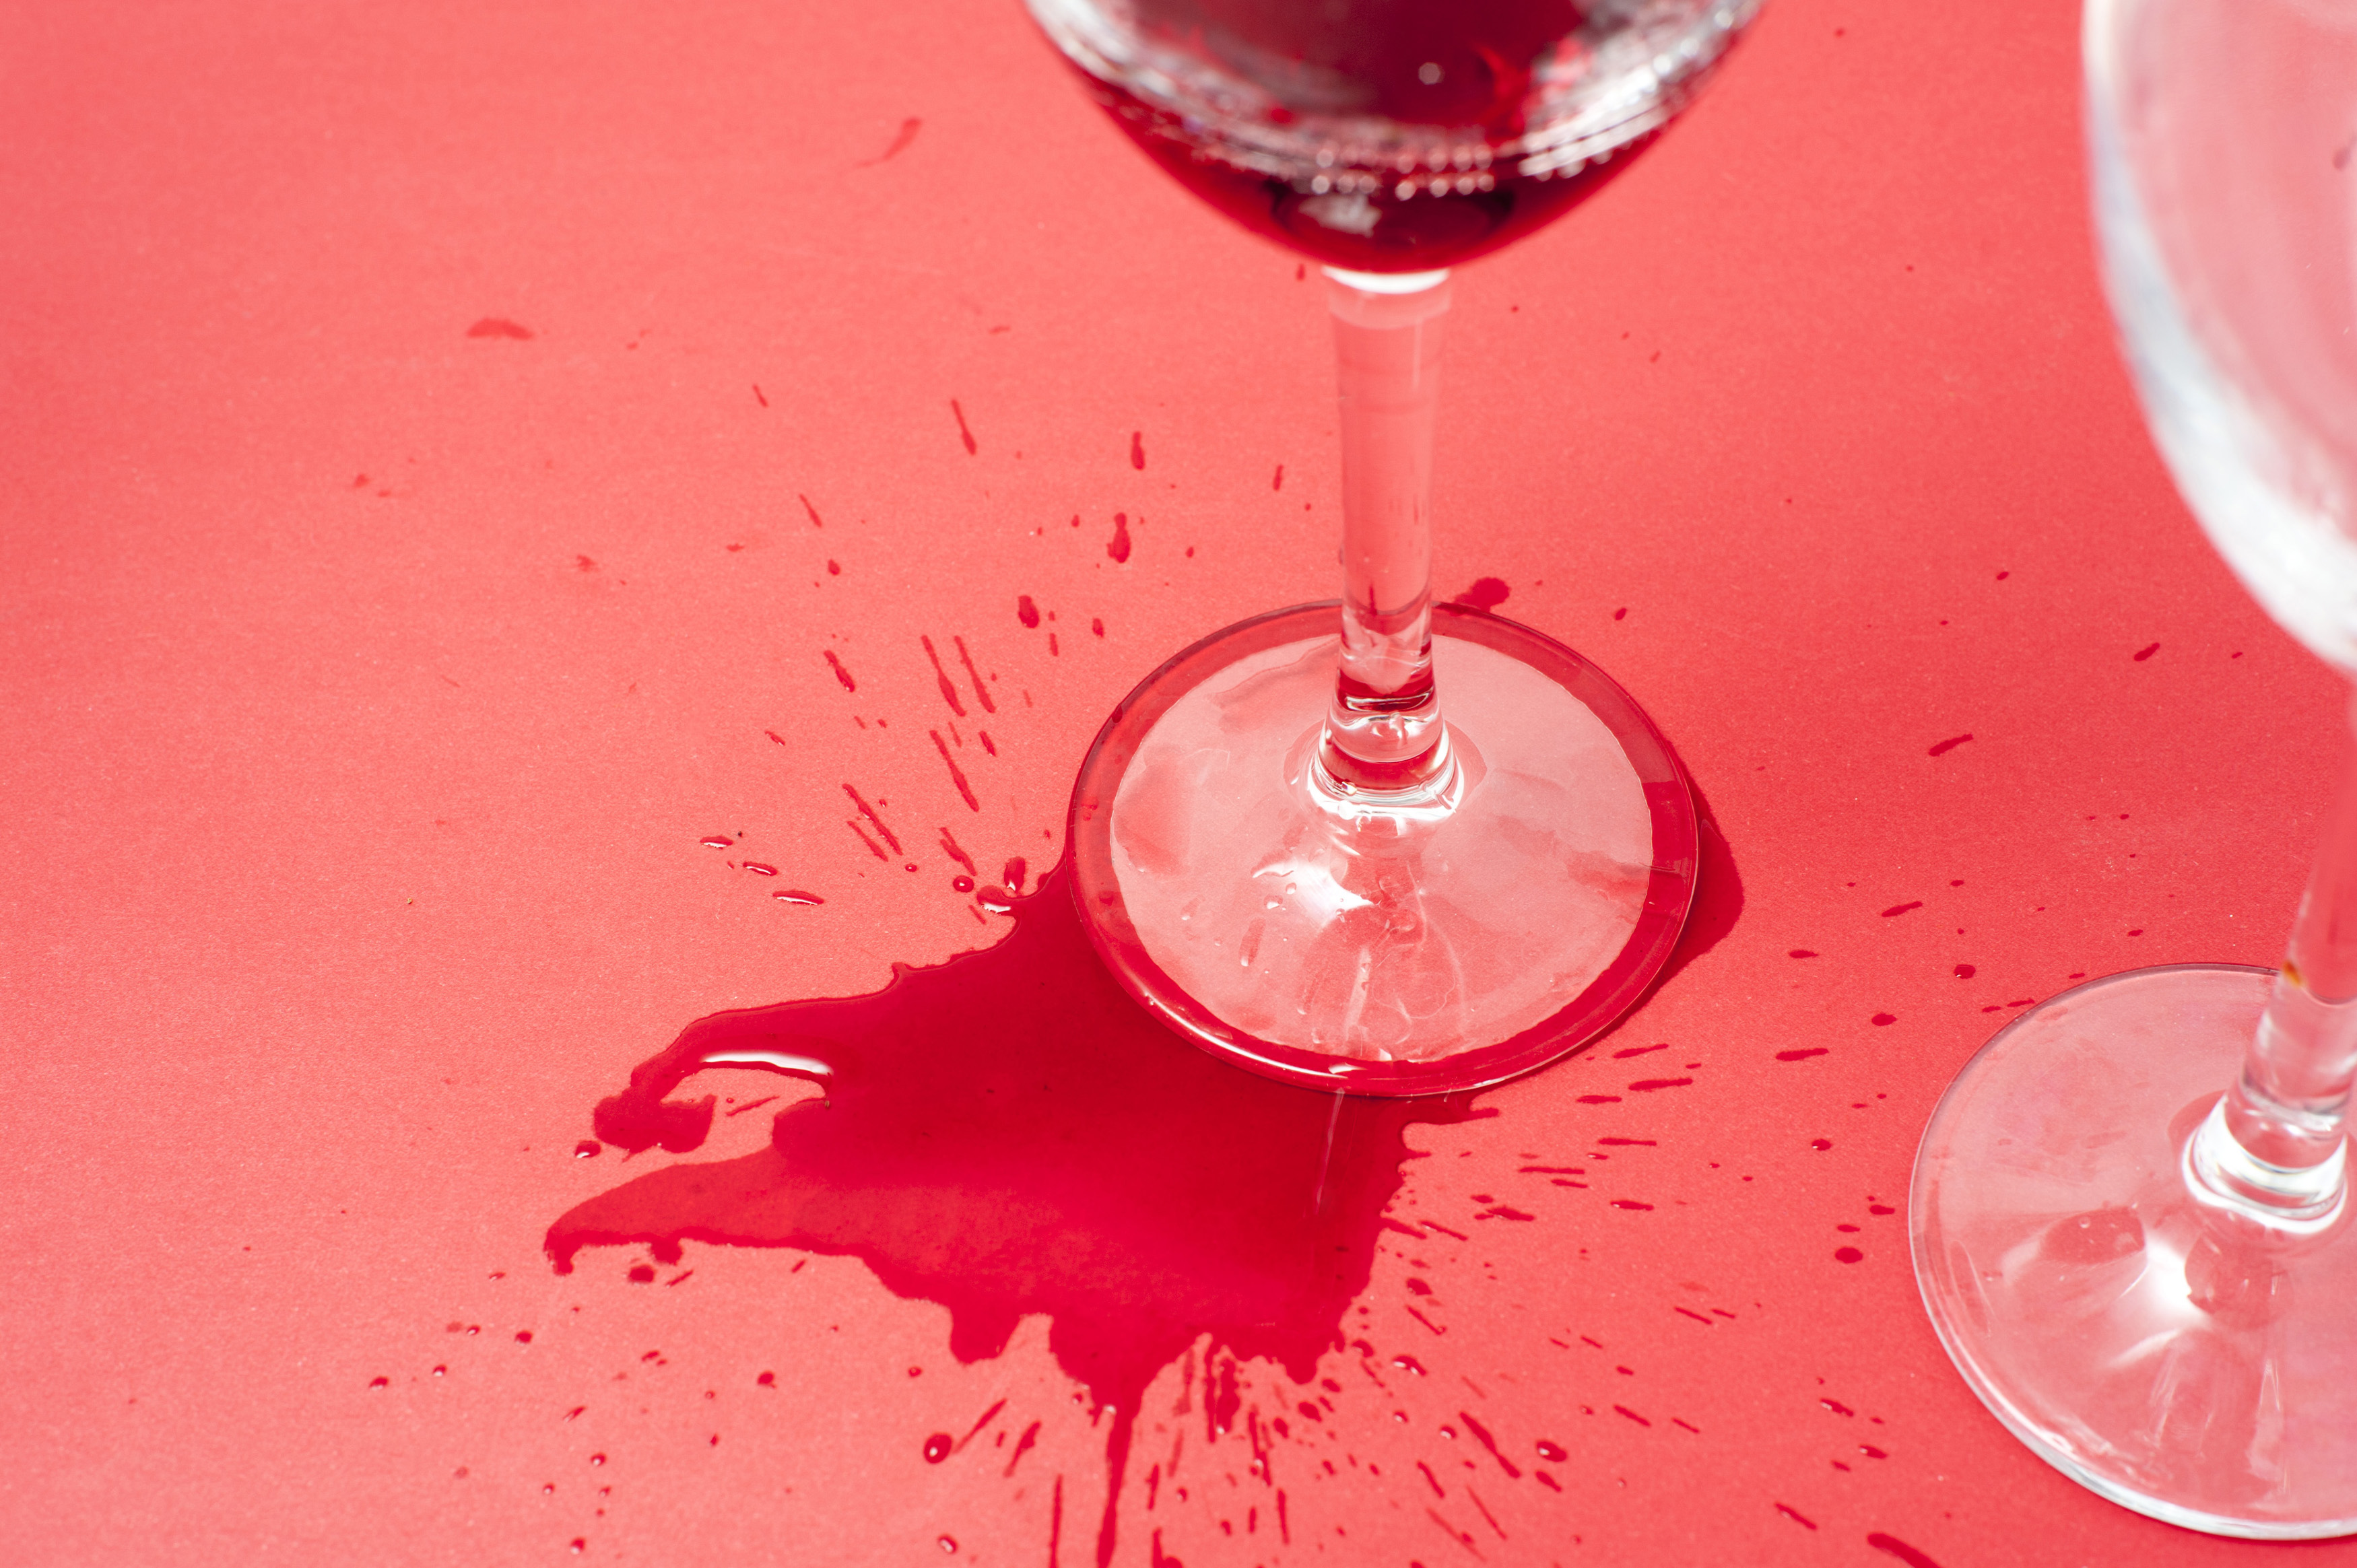 Spilled red wine - Free Stock Image